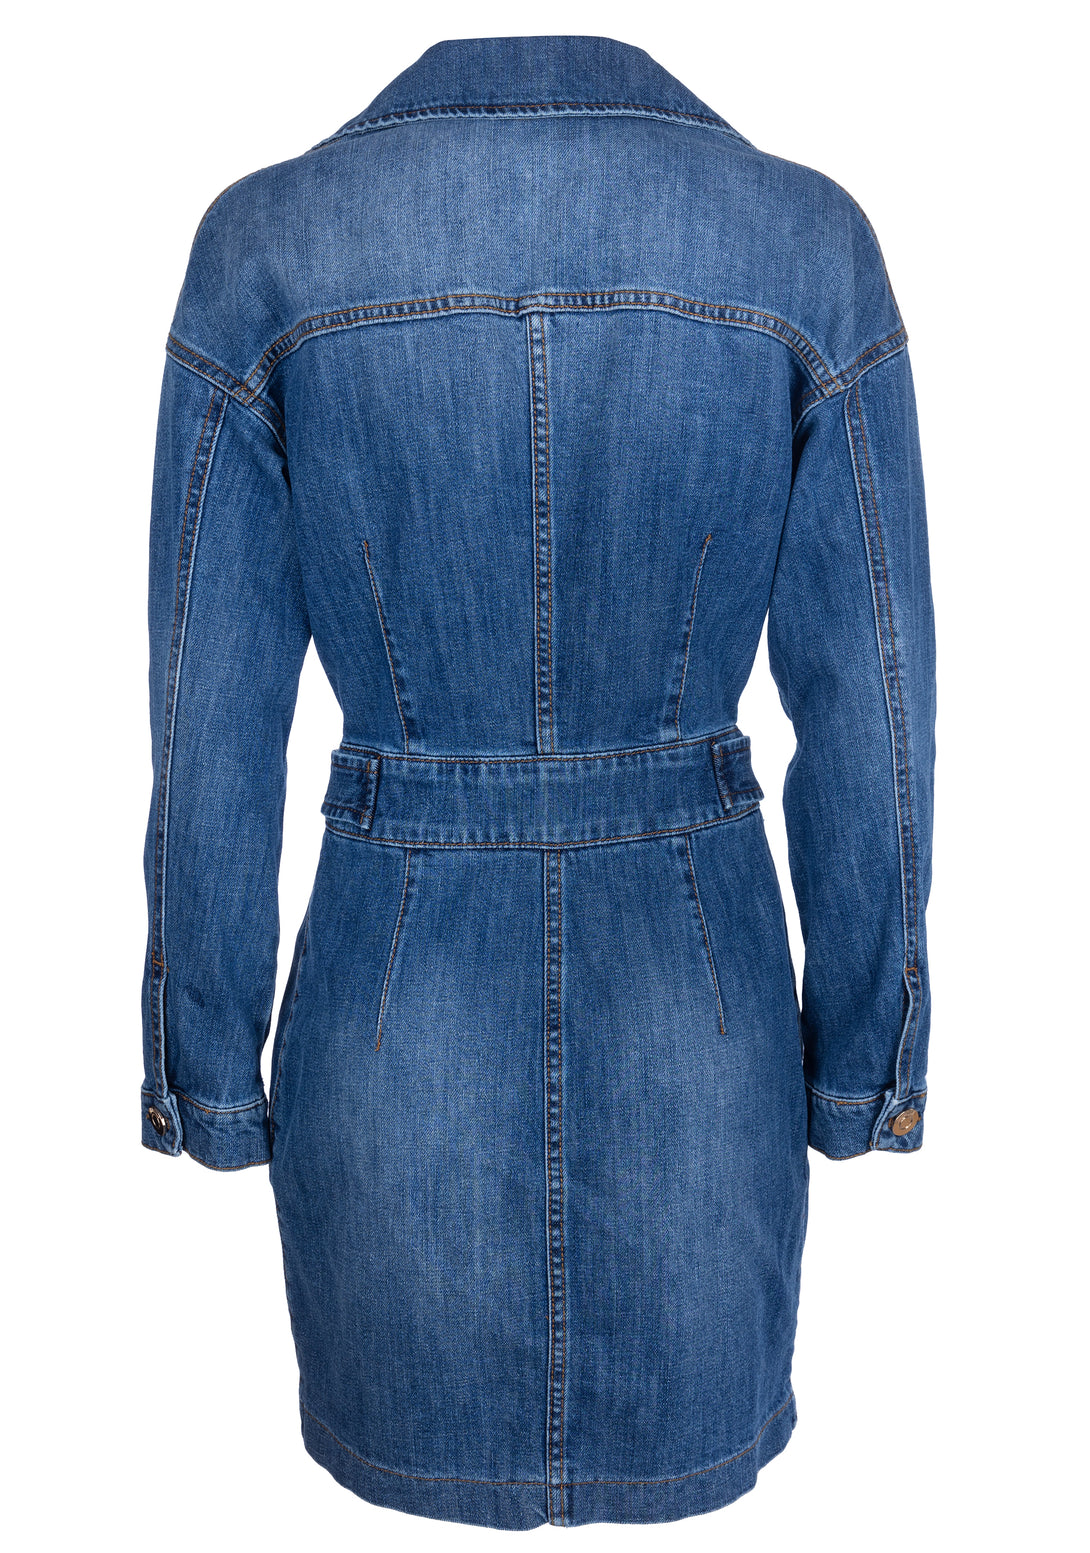 Mini dress slim fit made in denim with strong wash